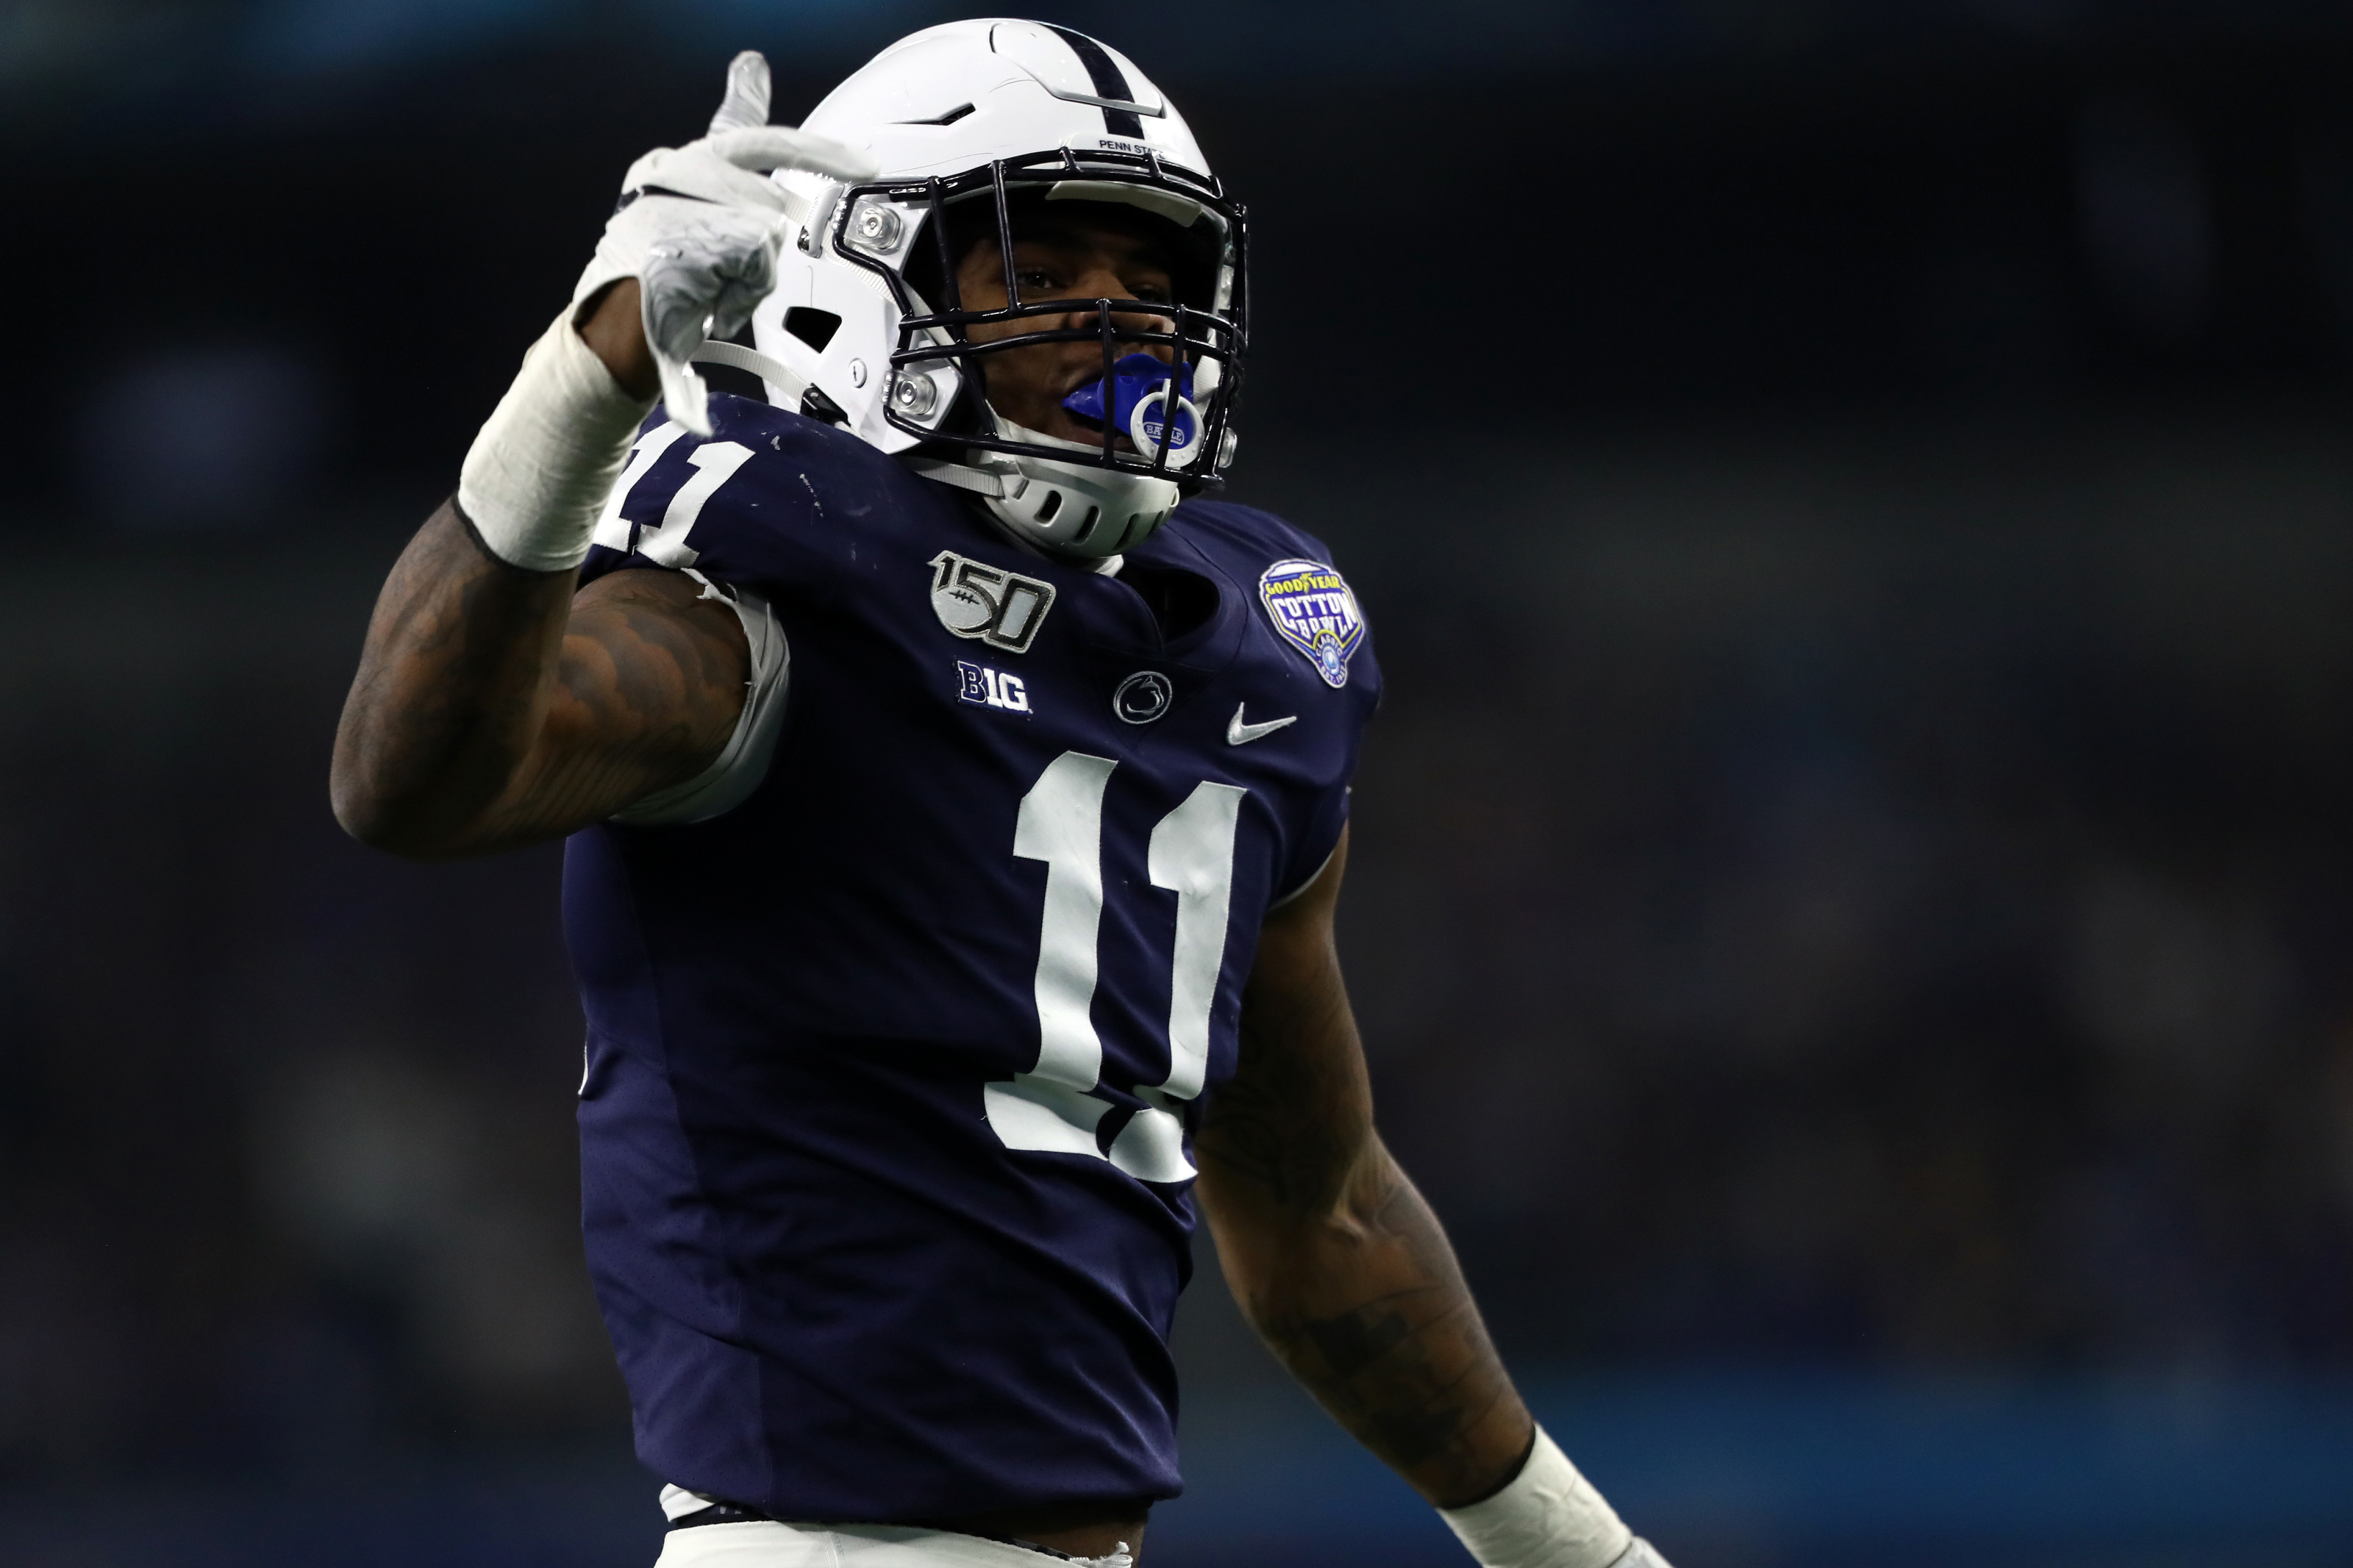 NFL Mock Draft: Penn State Football's Micah Parsons vaults into top 5?